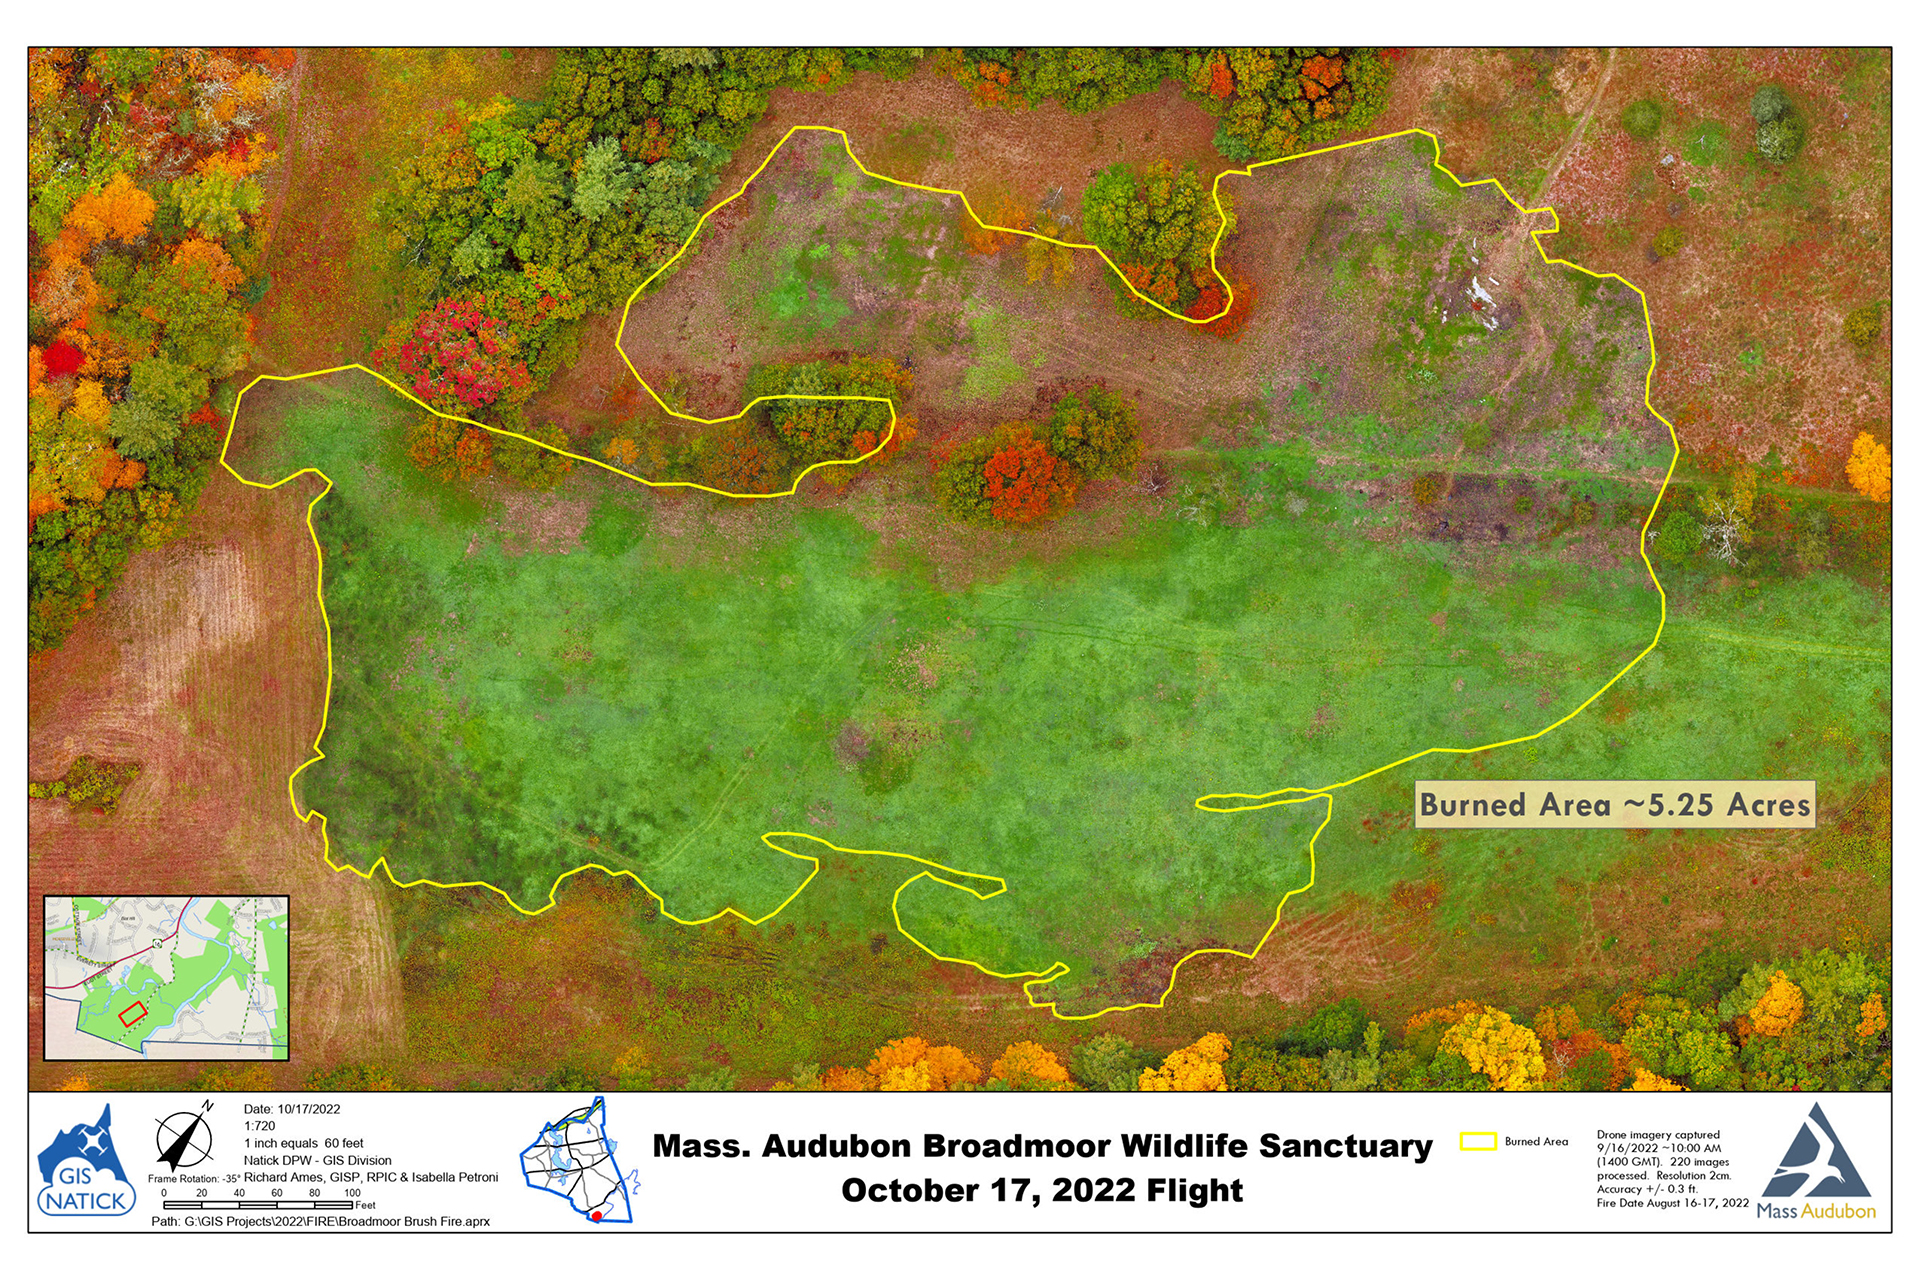 Aerial view of Broadmoor showing brush fire recovery, a green meadow with surrounding bright red and yellow trees, as of October 17, 2022